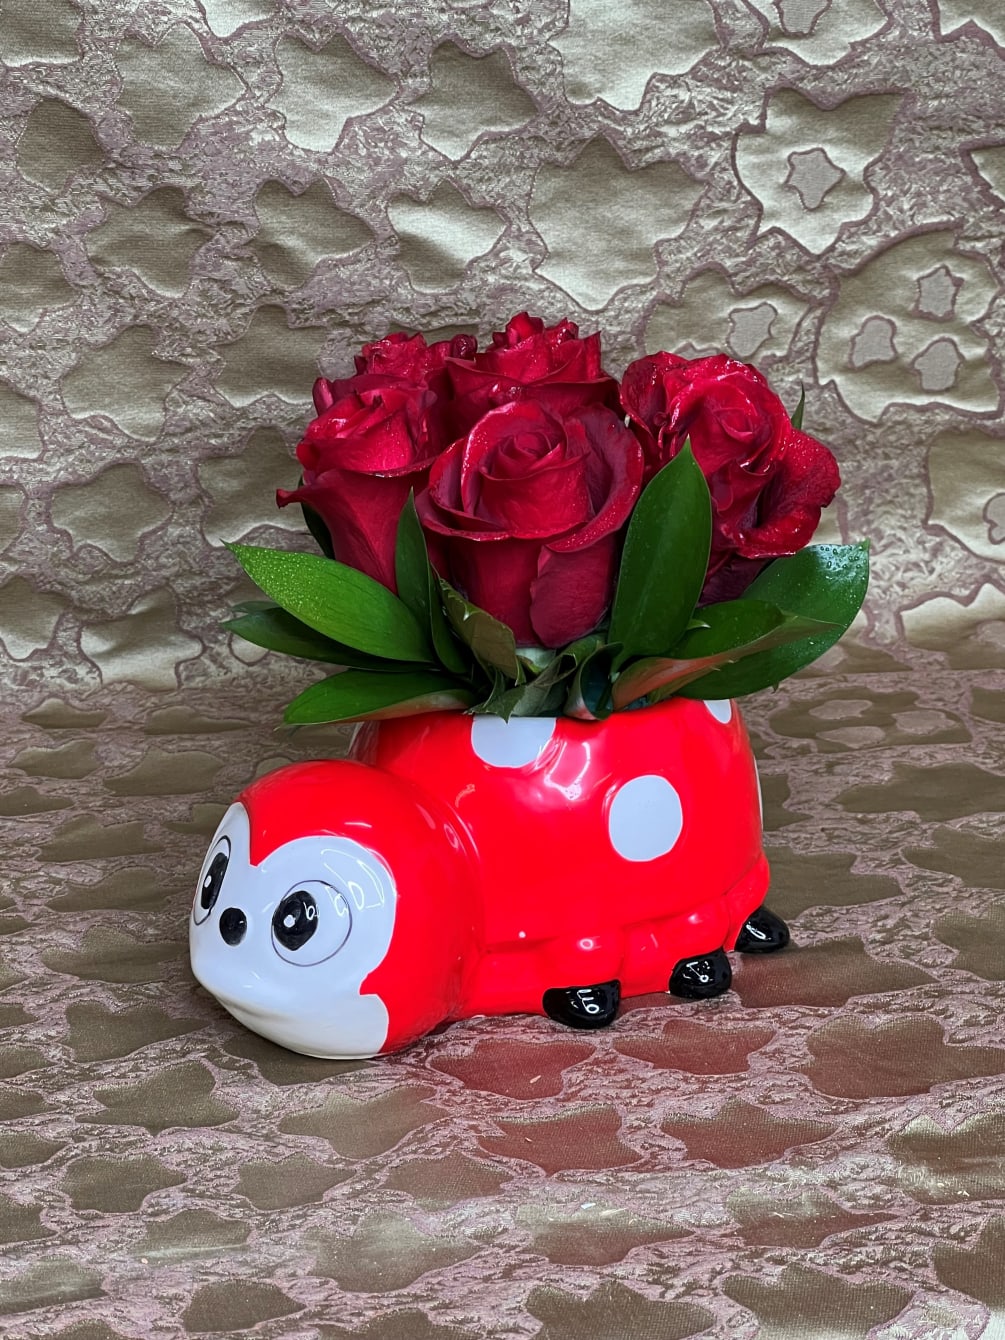 This cute Little Lady Bug will make anyone smile!  With imported